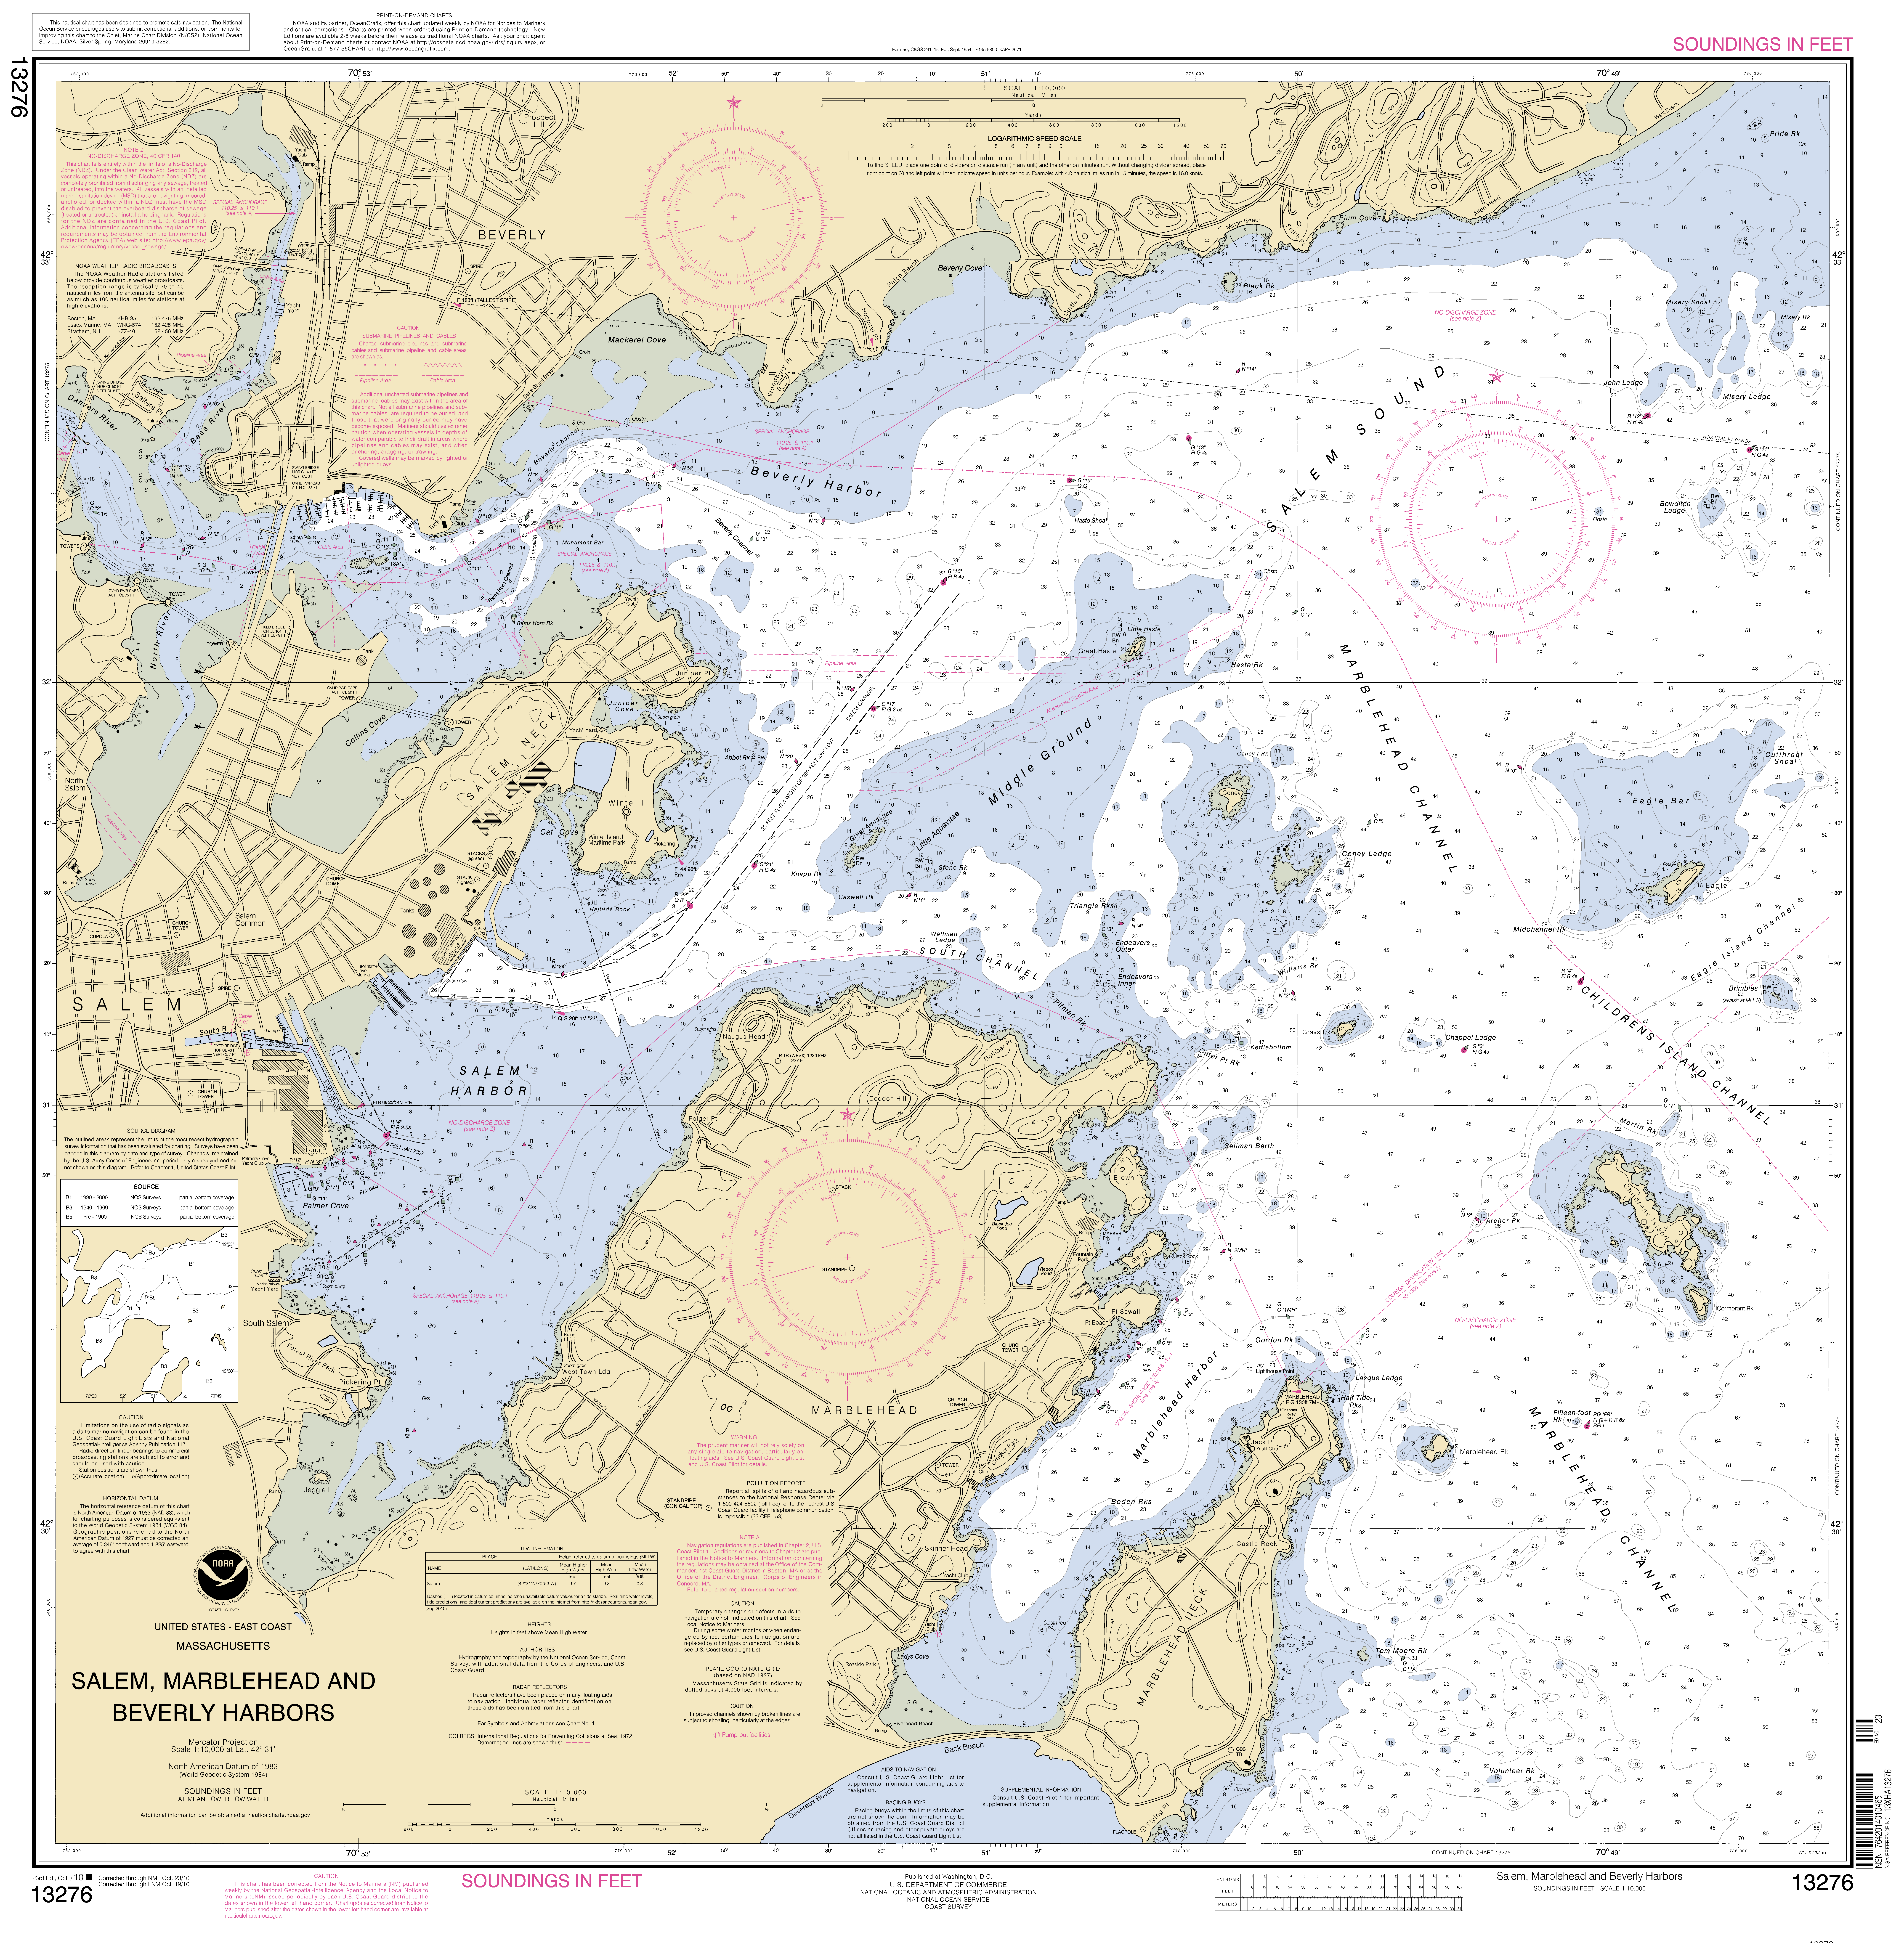 Nautical Chart Of A Harbor